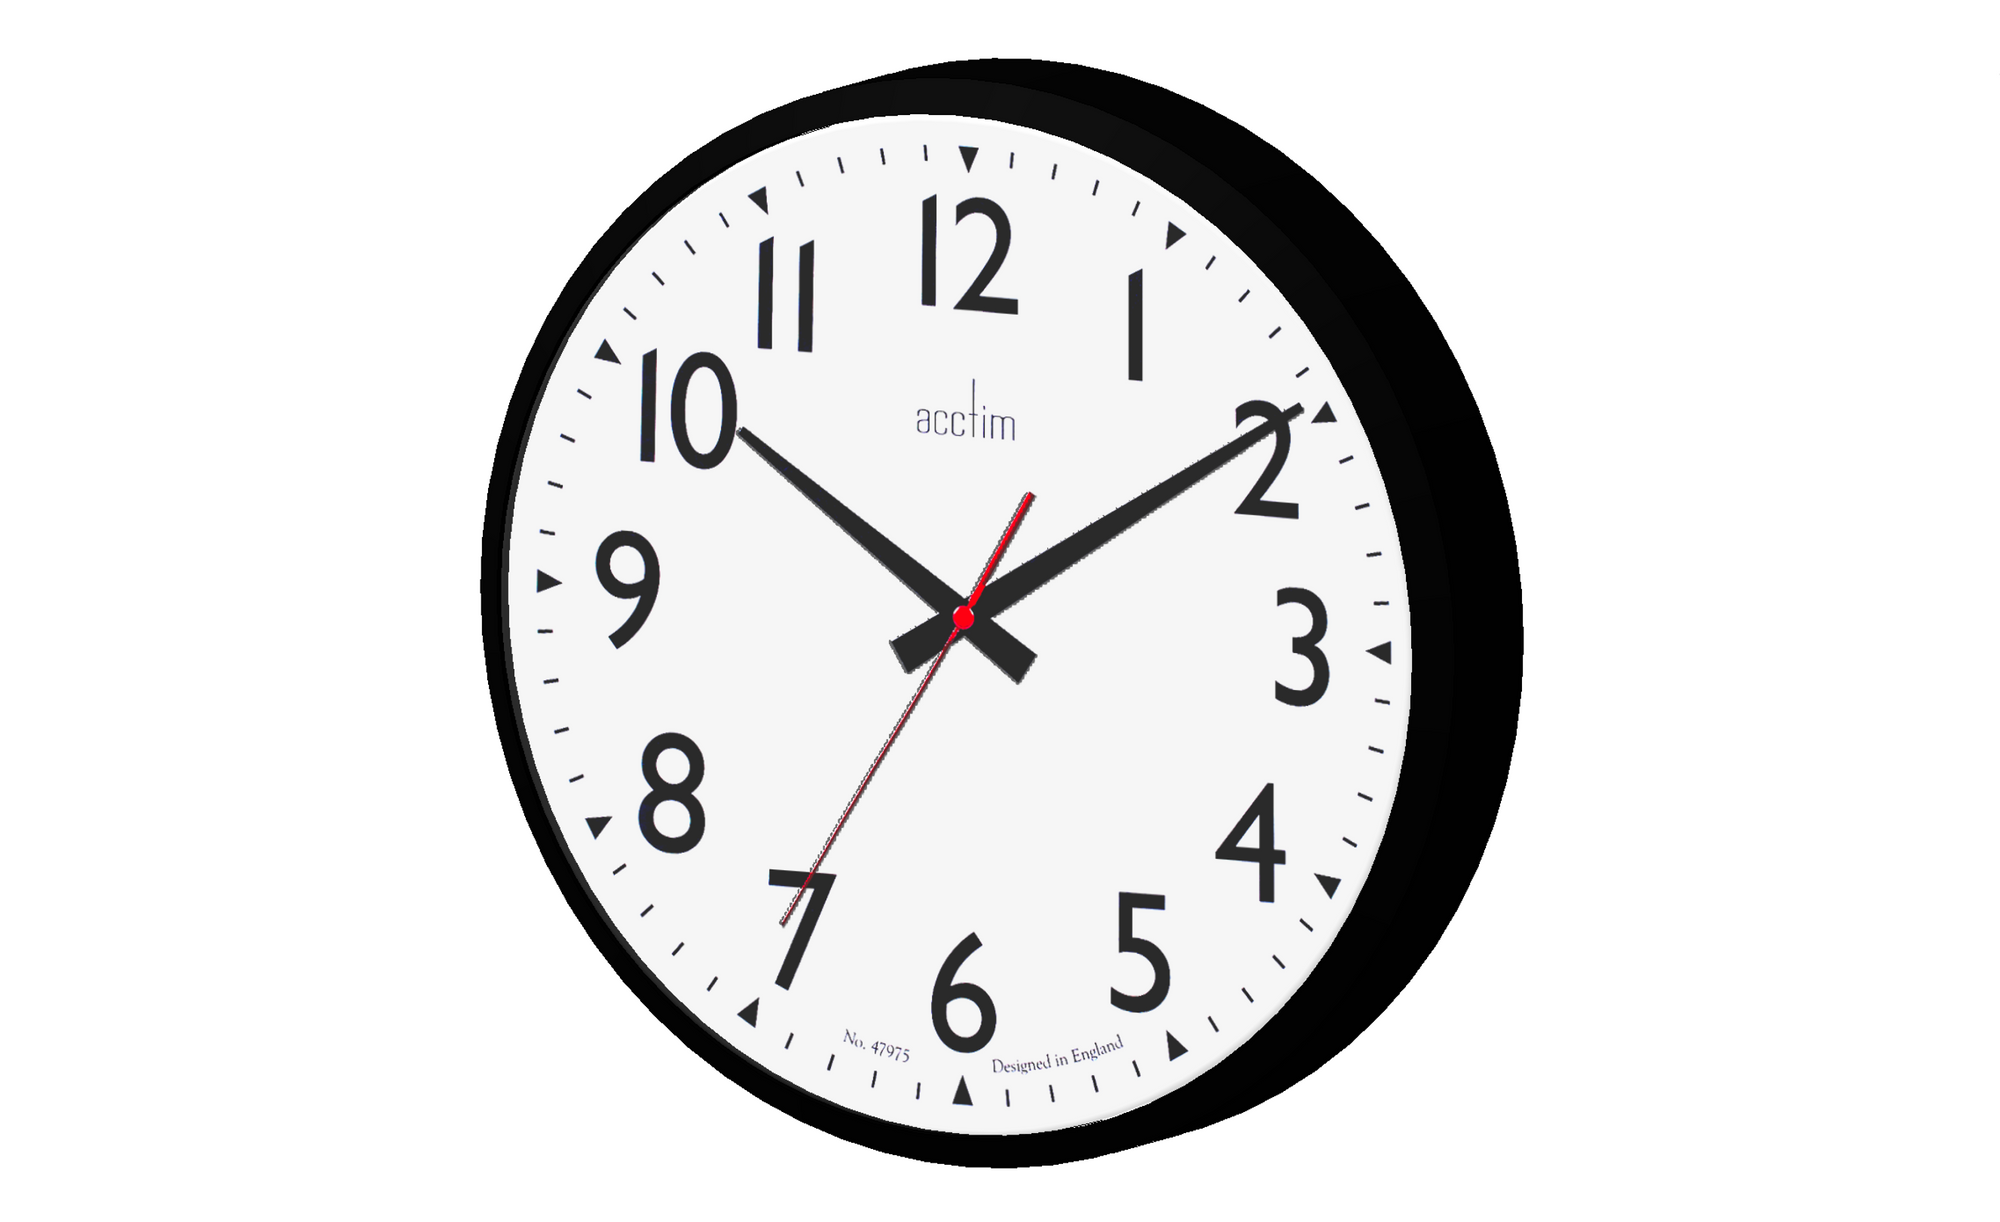 Revit family of wall mounted clock from Acctim